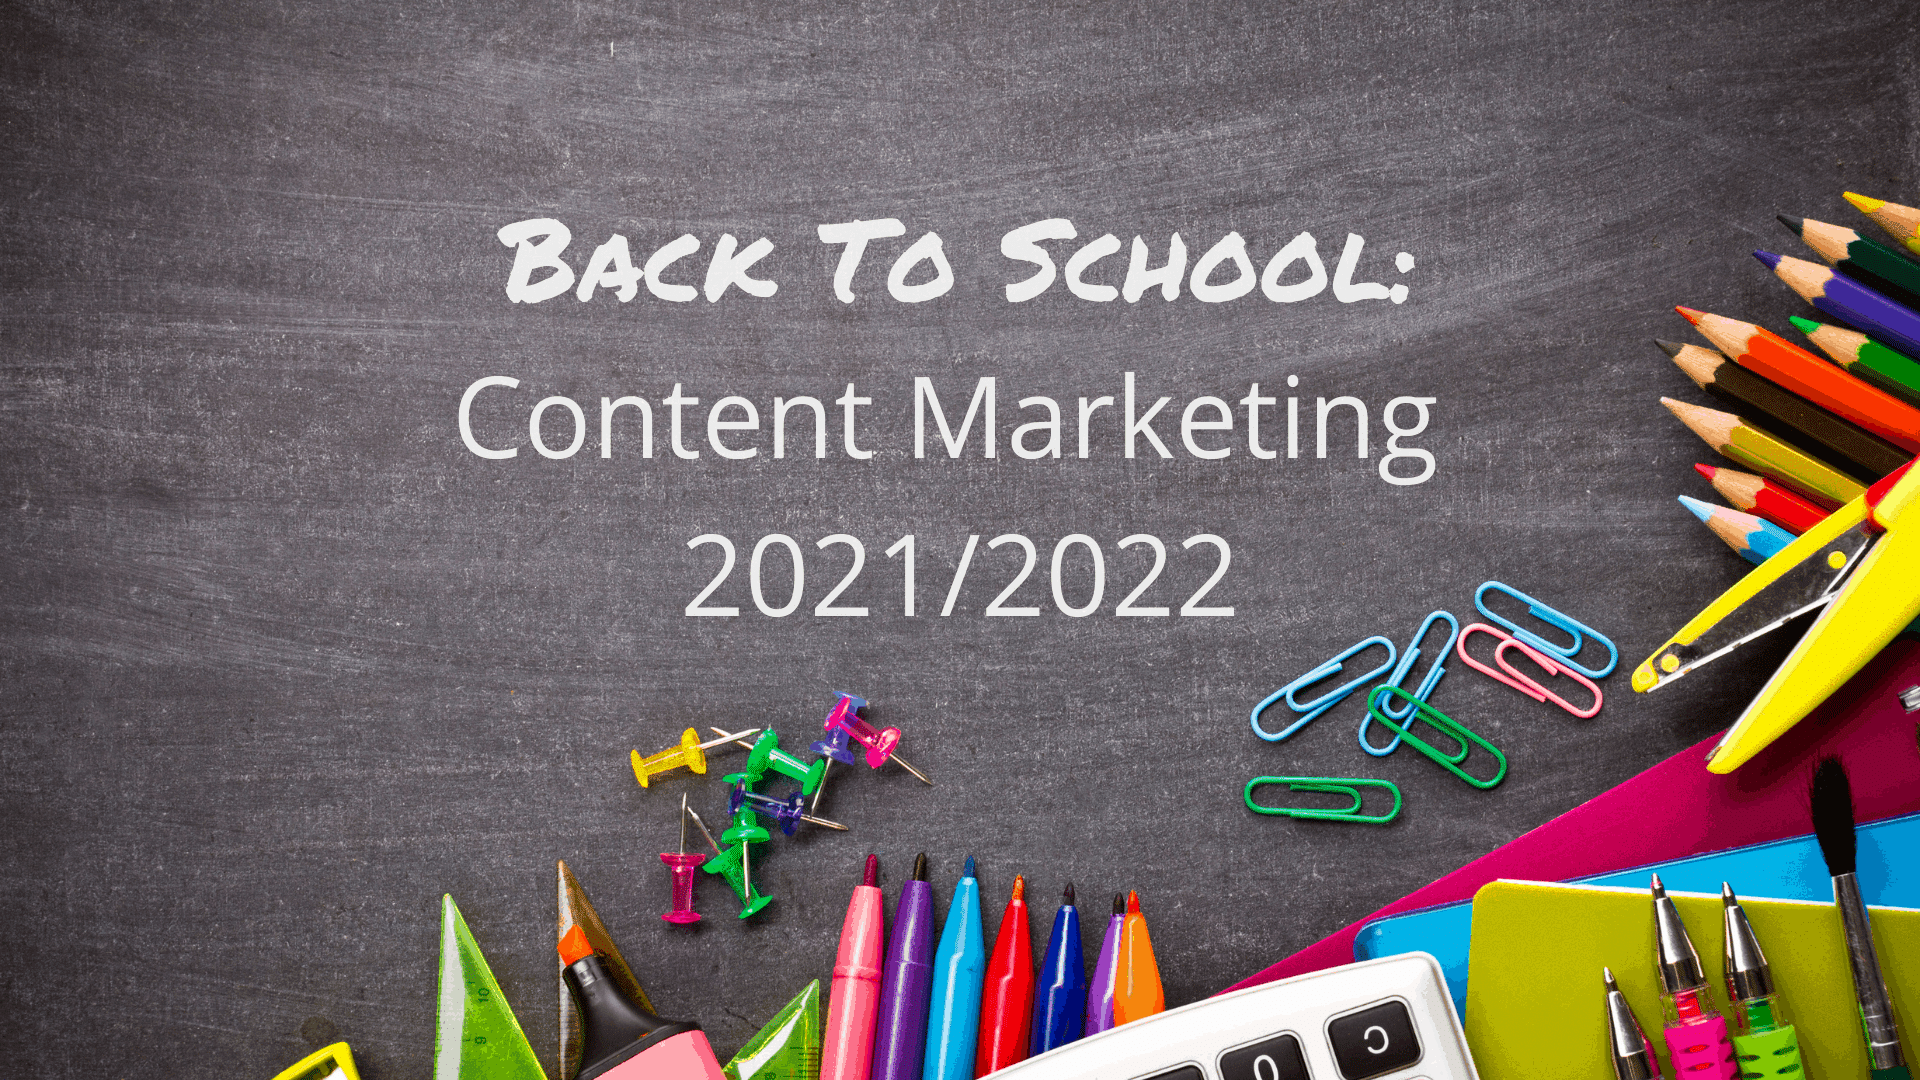 Back To School Content Marketing 2021 2022